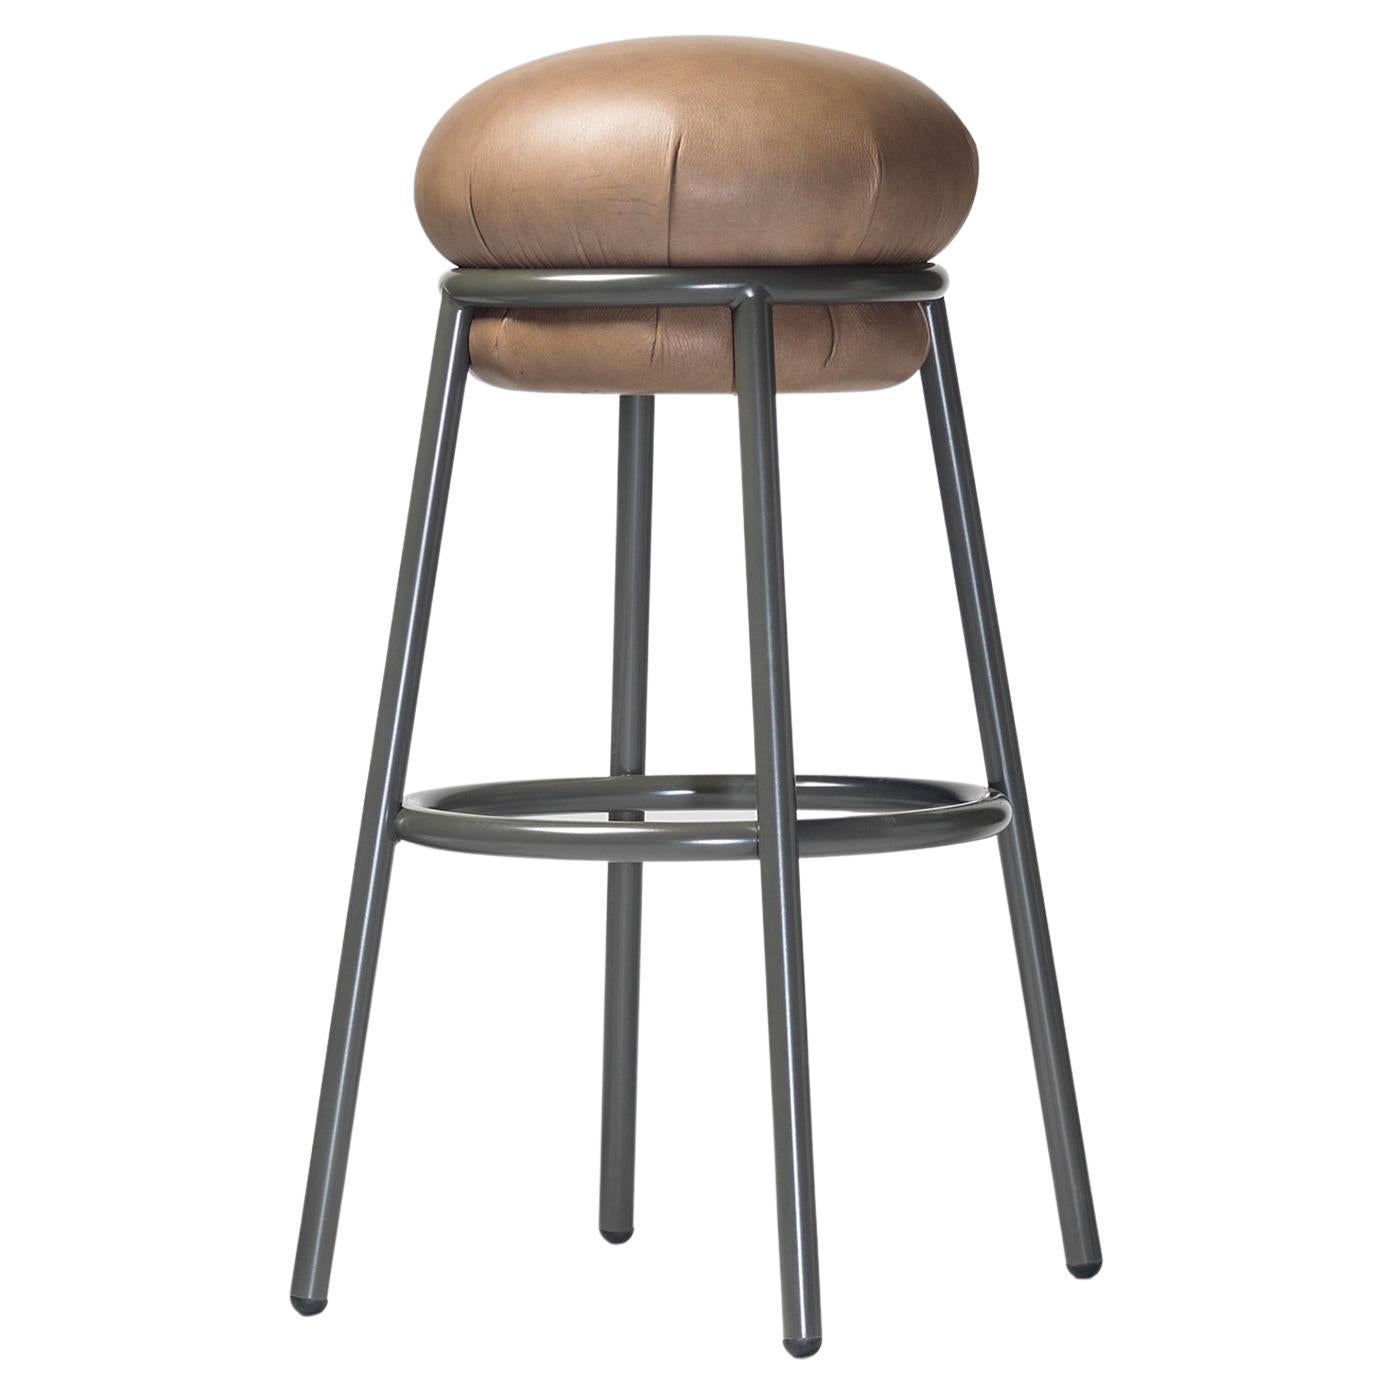 Grasso Bar Stool With Grey Steel Painted Framed With Clay Colored Leather Finish For Sale